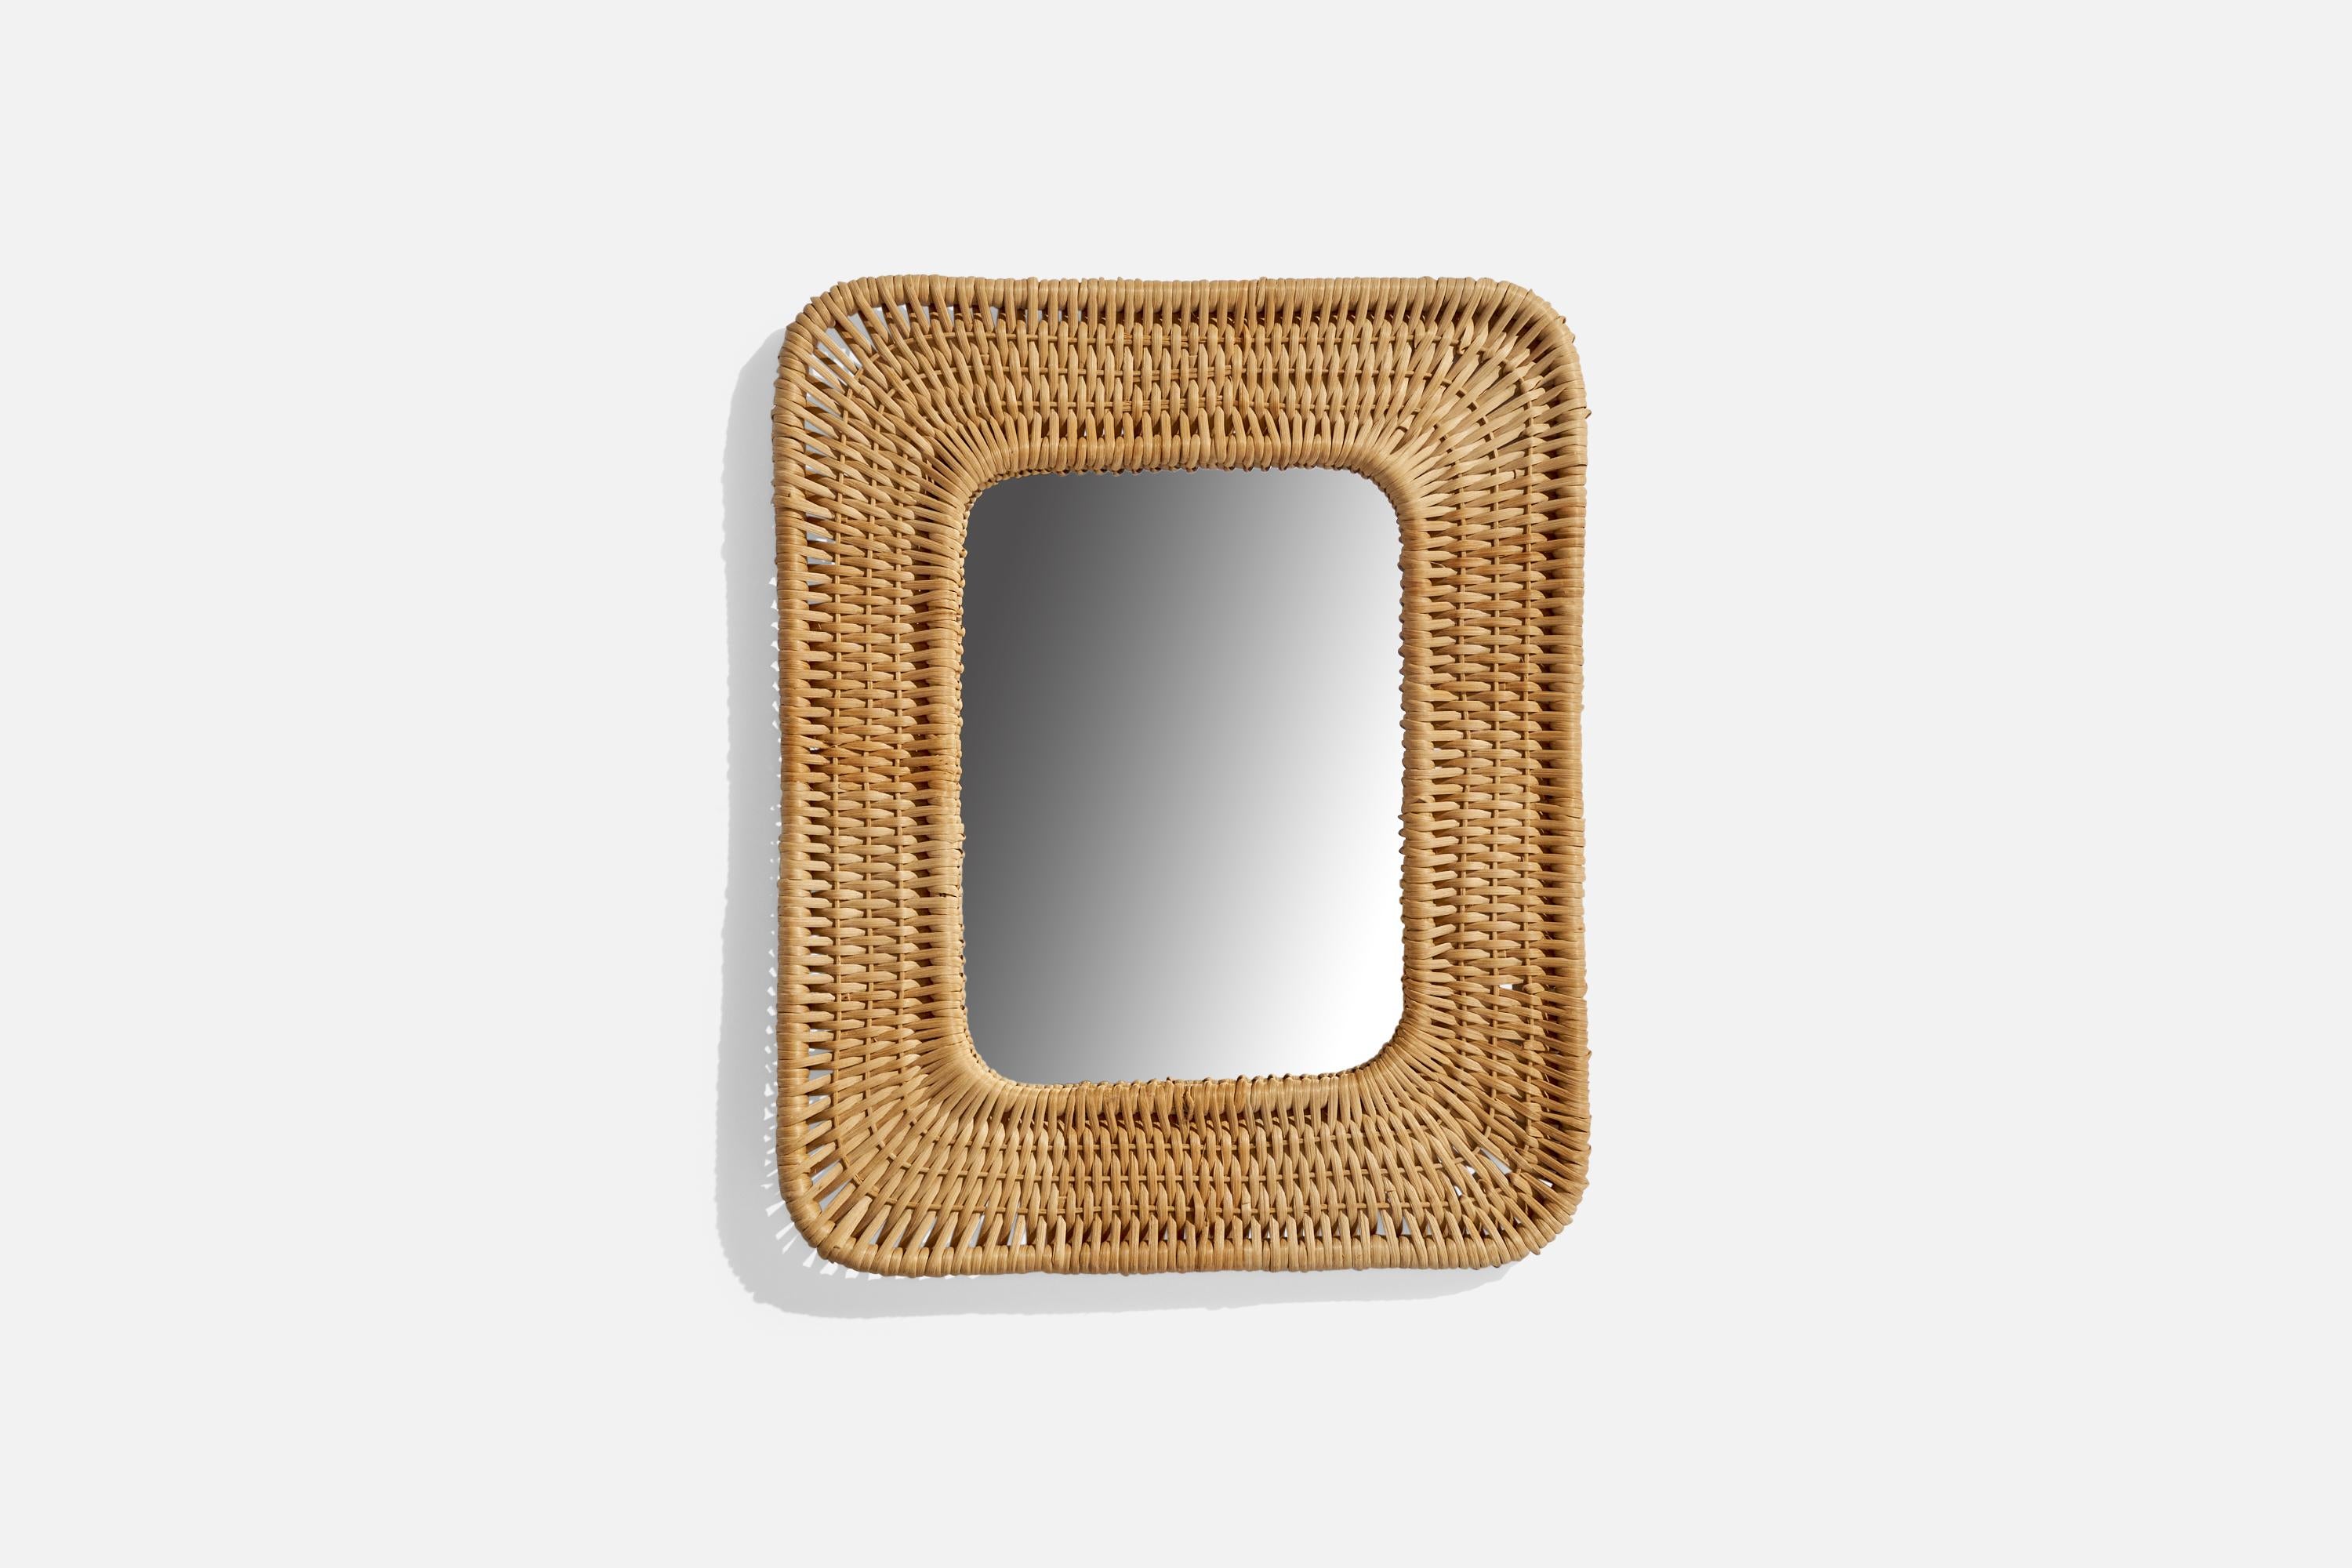 A woven rattan wall mirror designed and produced in Sweden, 1970s.